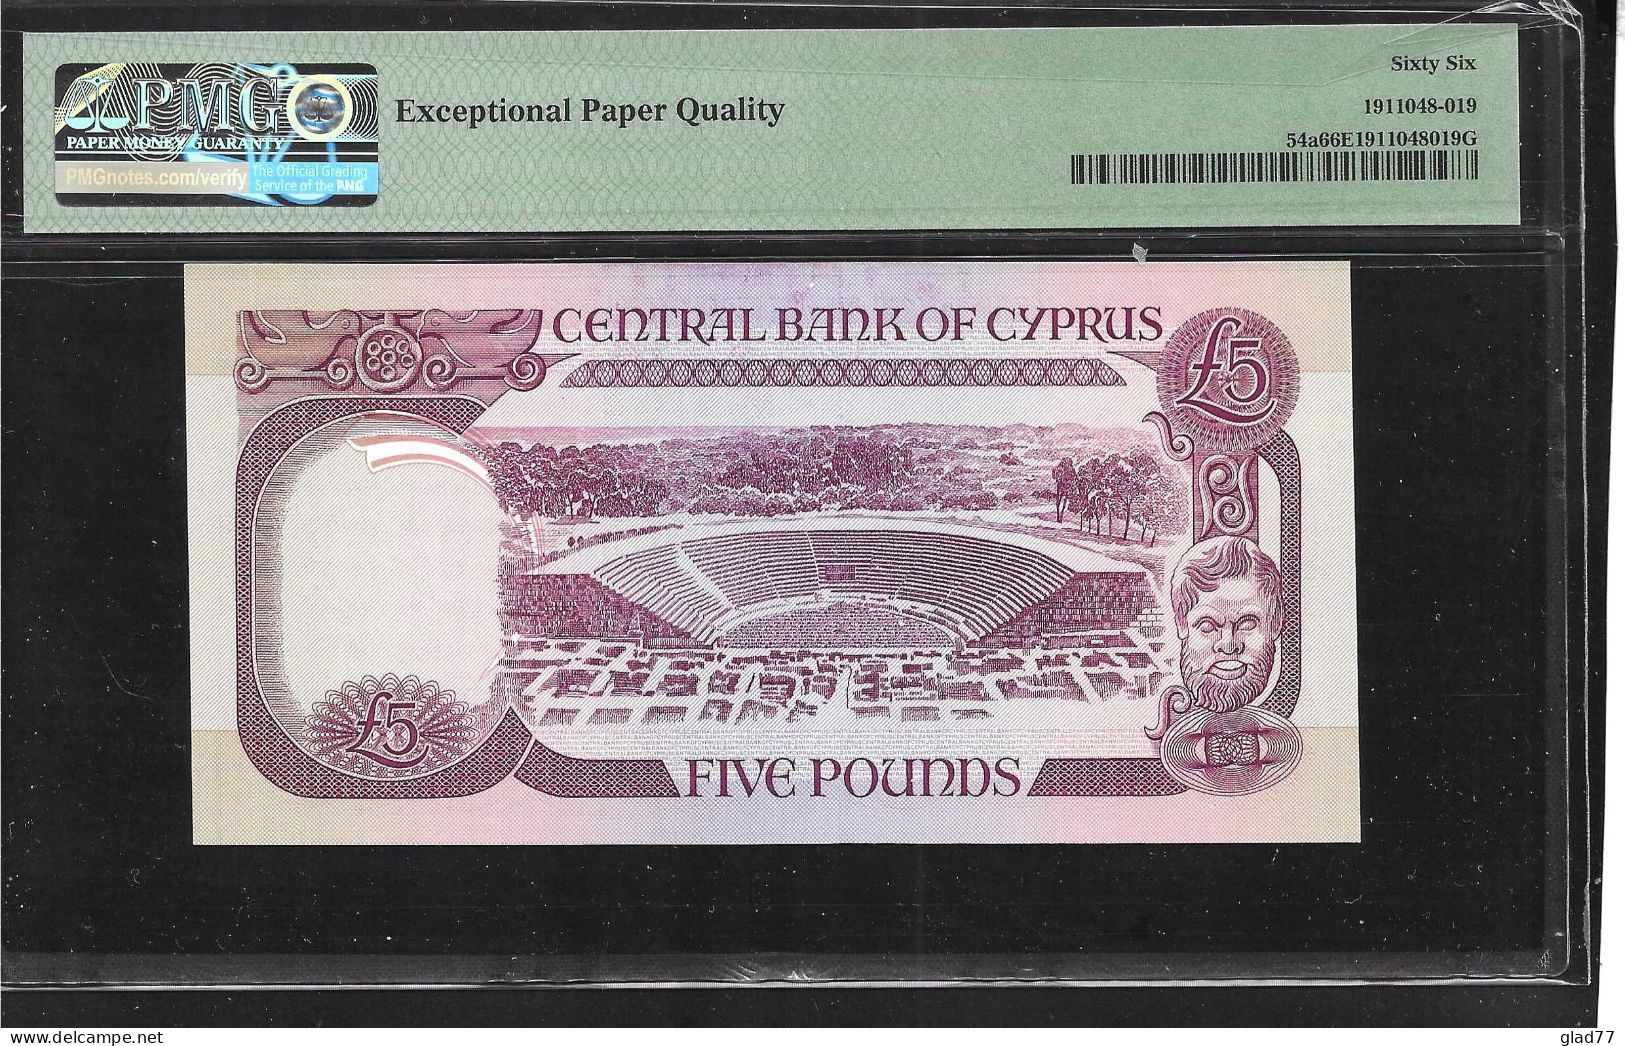 Cyprus  5 Pounds 1.10.1990 PCGS  66 PPQ (Perfect Paper Quality) GEM UNC! Low Serial Number ! - Zypern